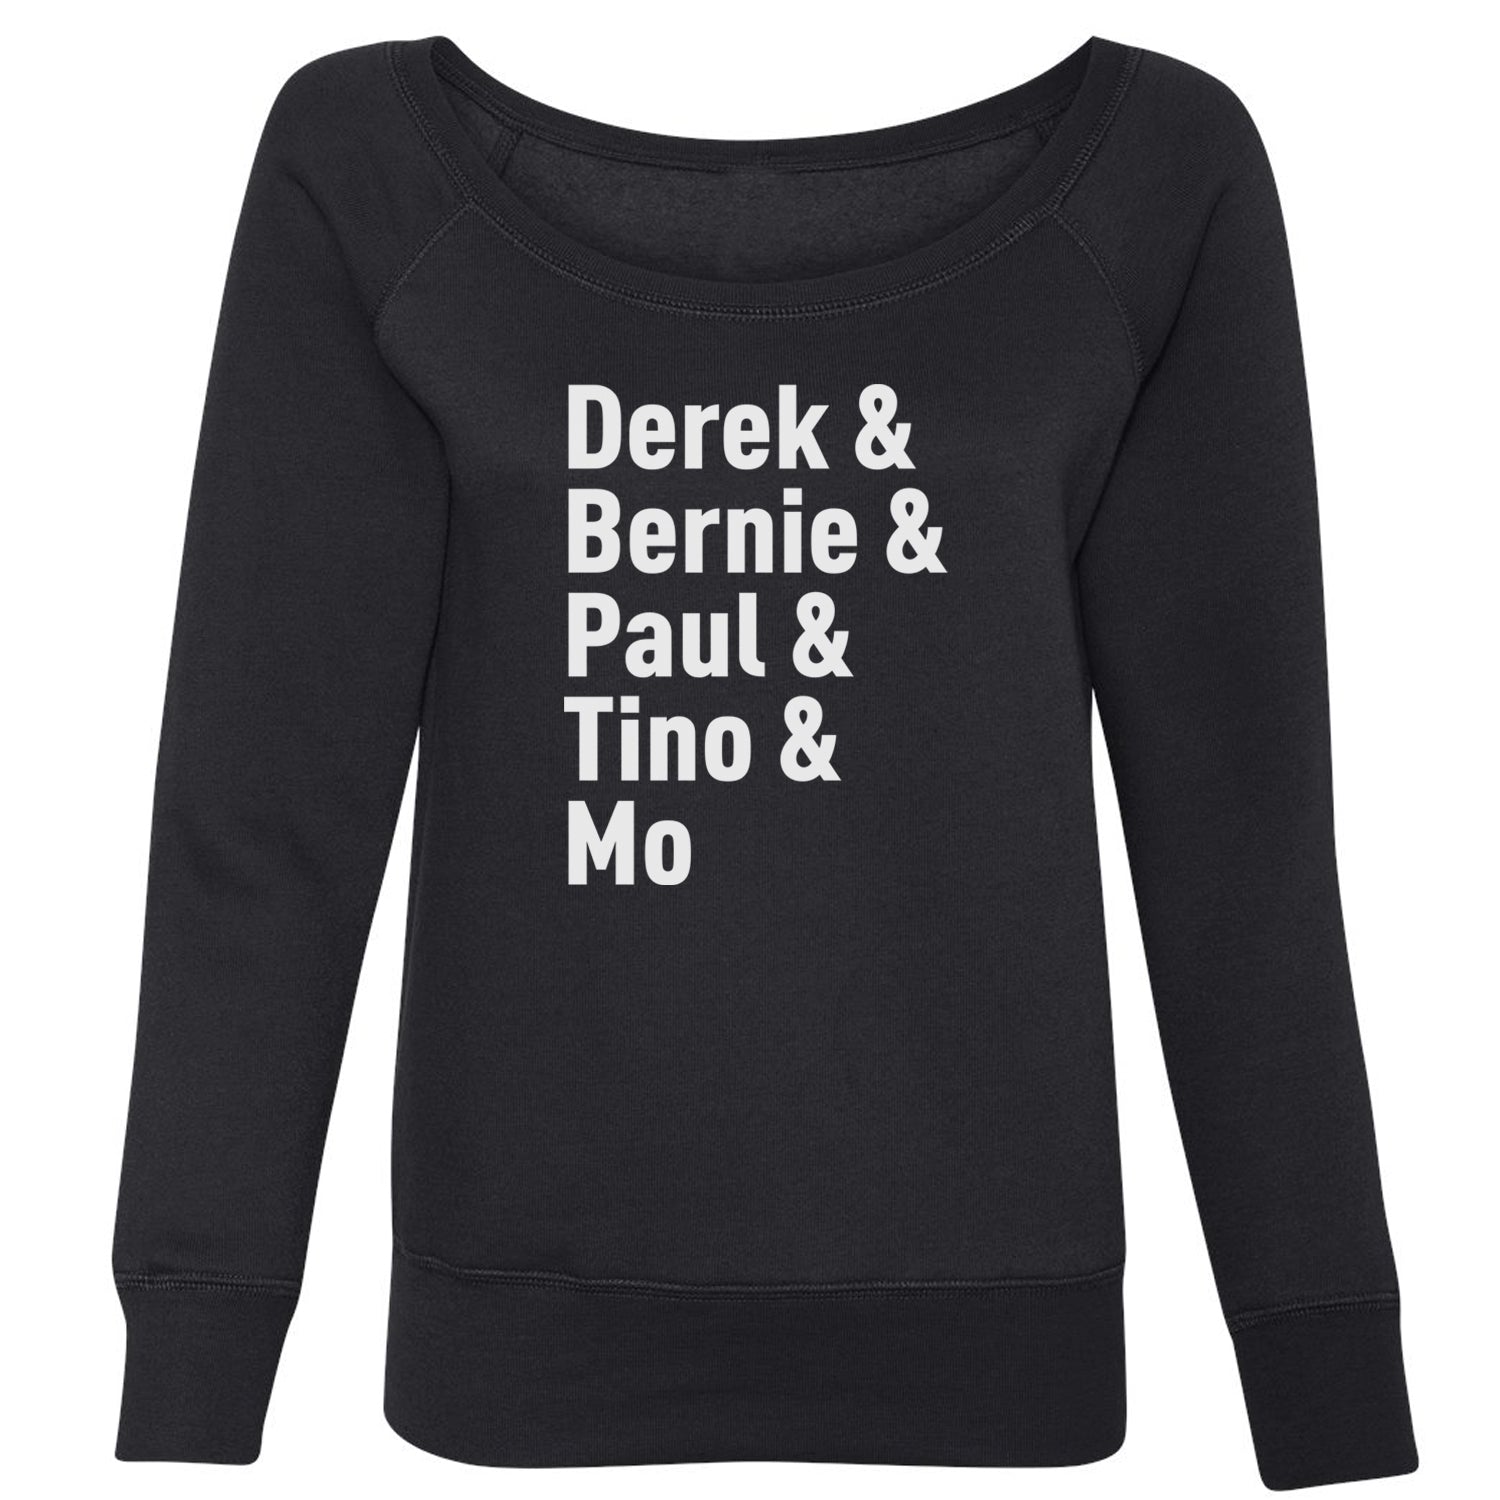 Derek and Bernie and Paul and Tino and Mo Slouchy Off Shoulder Oversized Sweatshirt baseball, comes, here, judge, the by Expression Tees